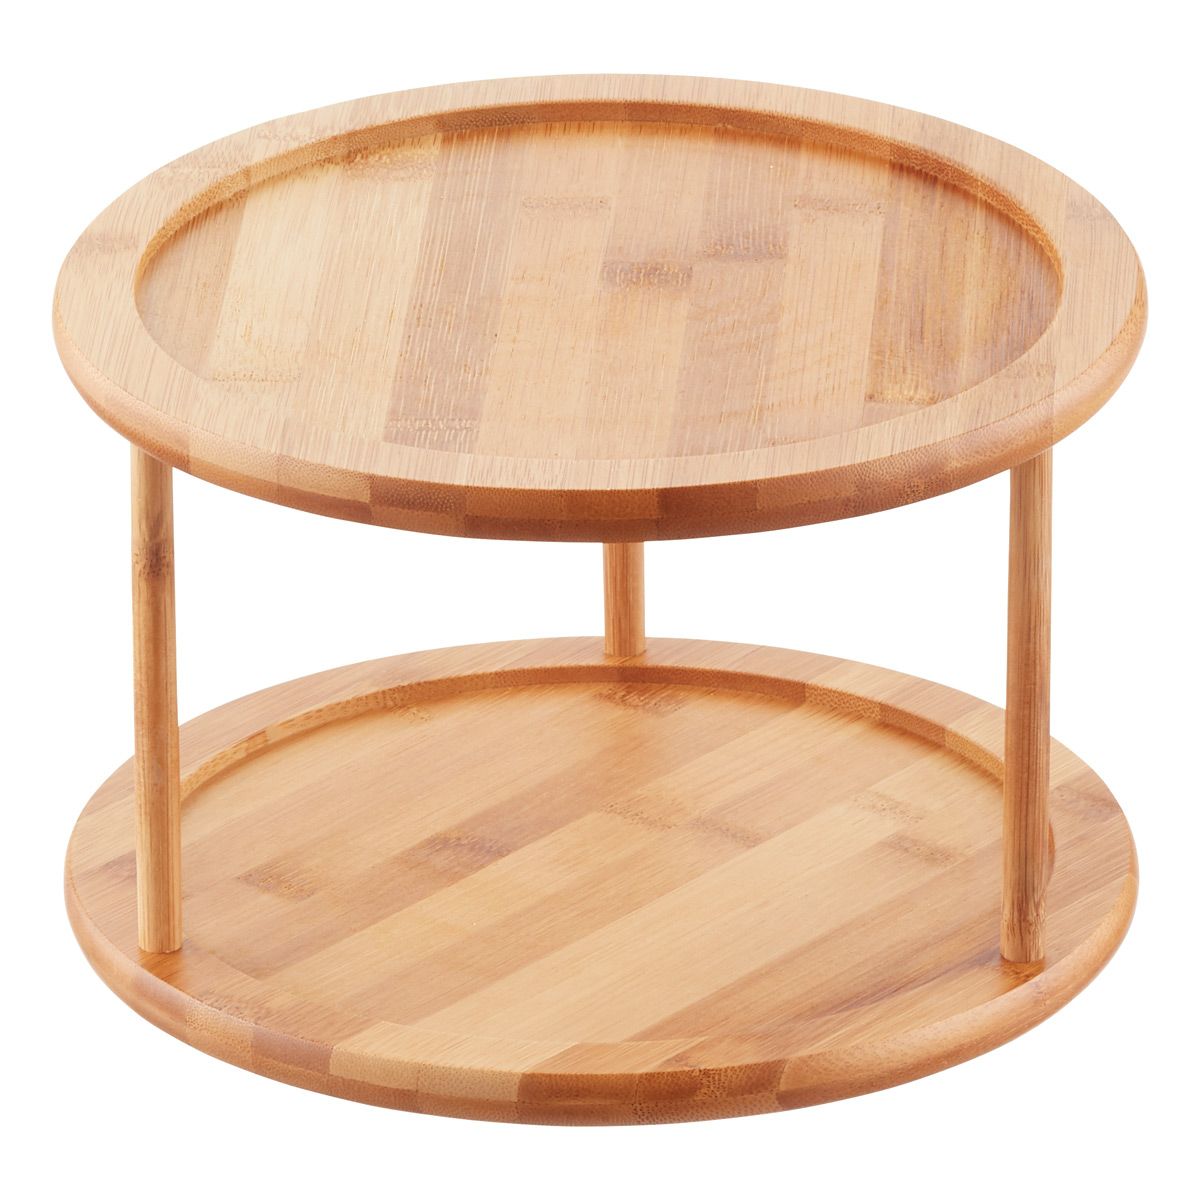 Bamboo Double Turntable | The Container Store